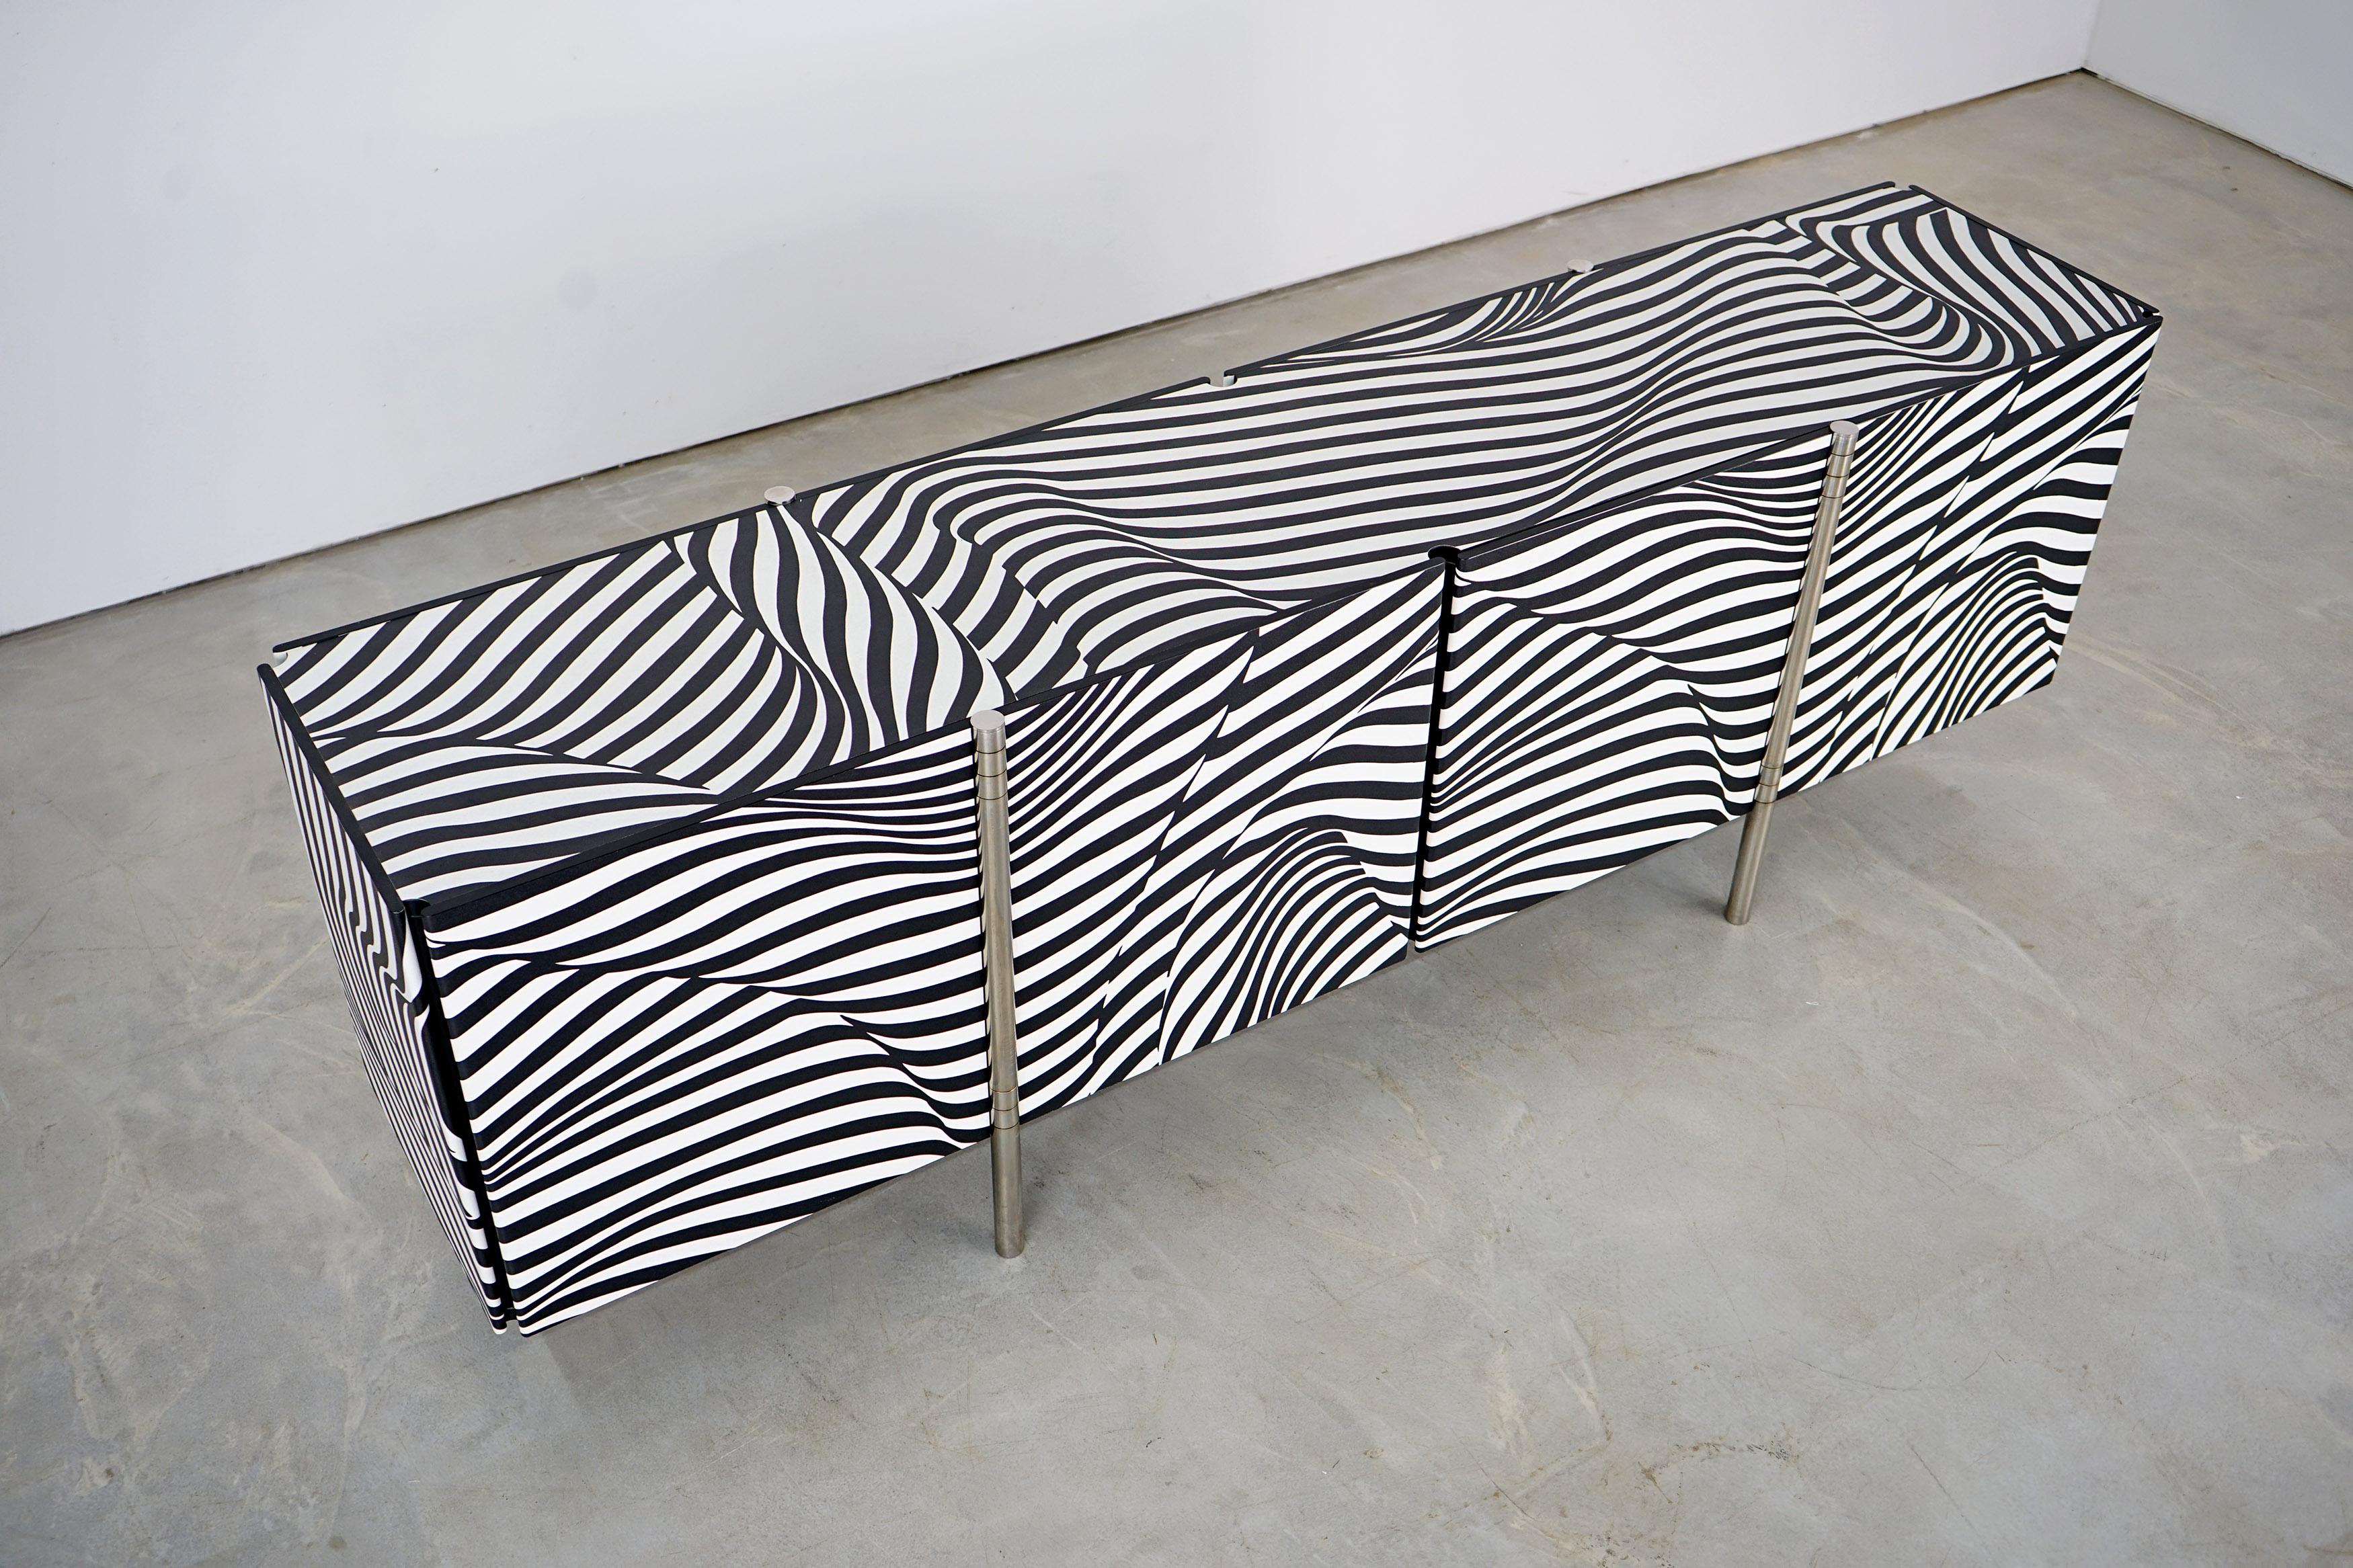 Amor Stripe 12 Sideboard by Robert and Trix Haussmann for Wogg, Original Edition In Excellent Condition In Munster, NRW